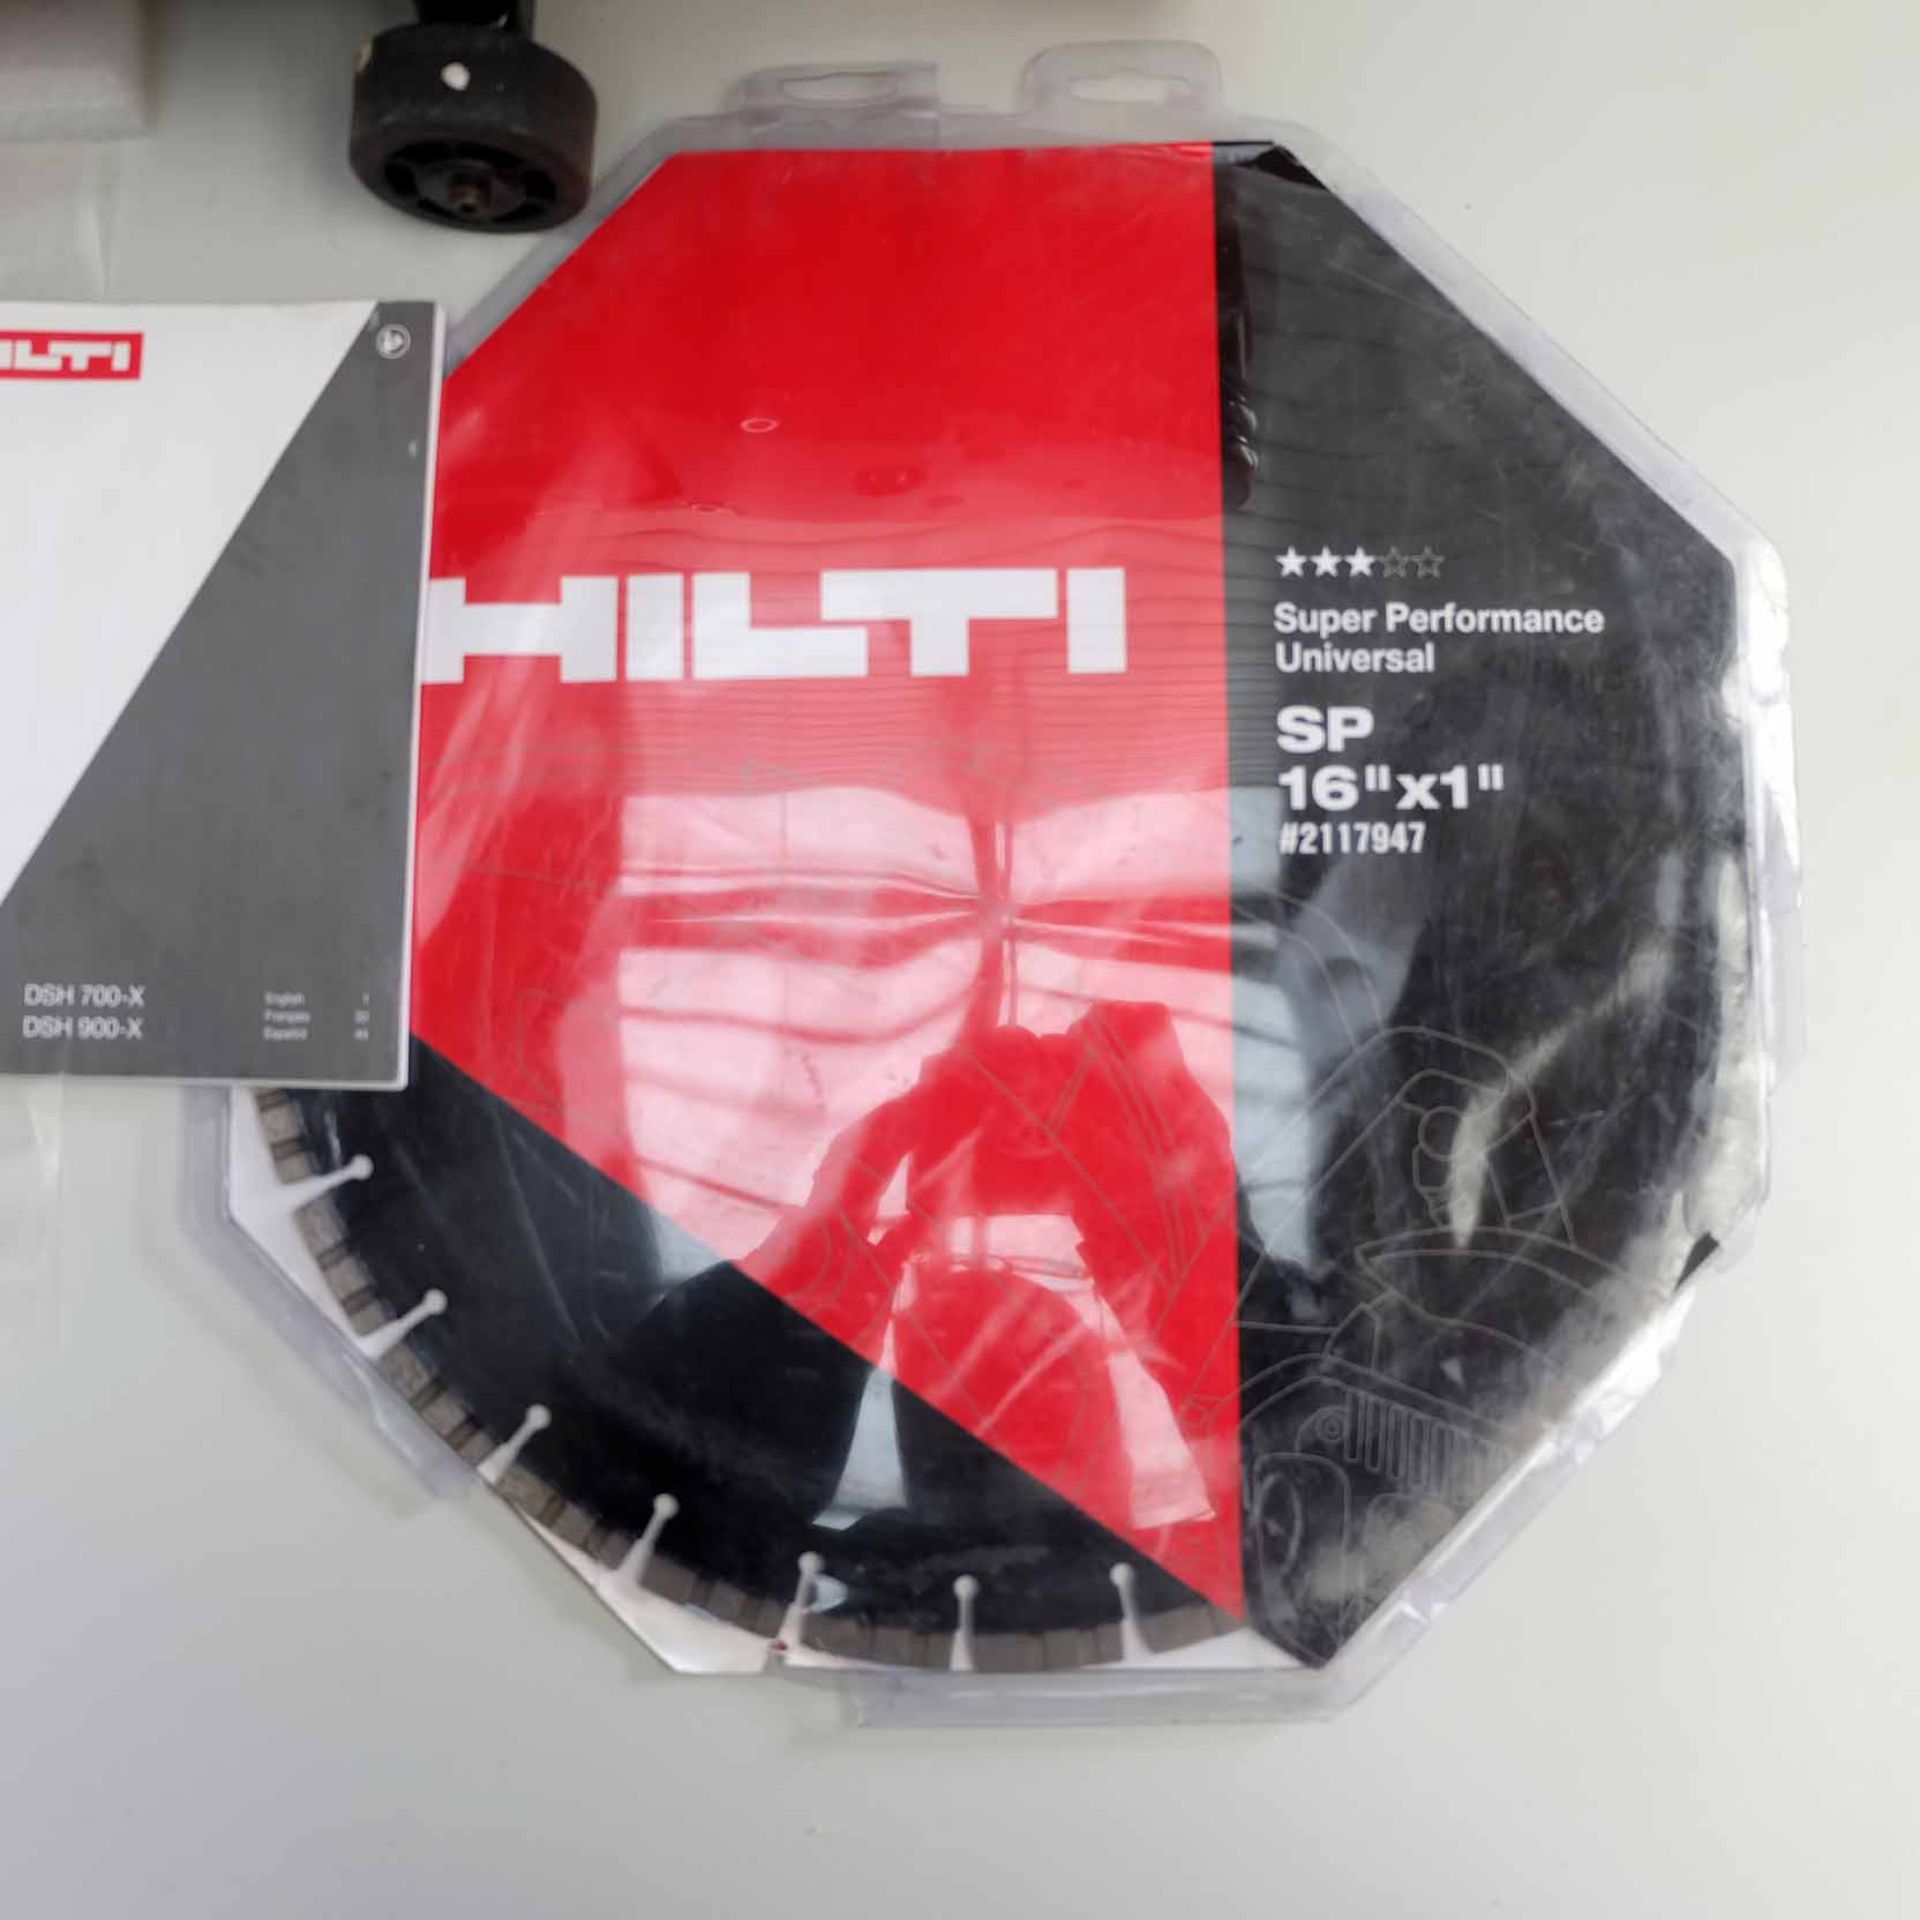 Hilti Hand Held Gas Saw. Model DSH 900-X 16". Complete With SP-16"x1" Blade. Easy Start Auto-Choke S - Image 15 of 25